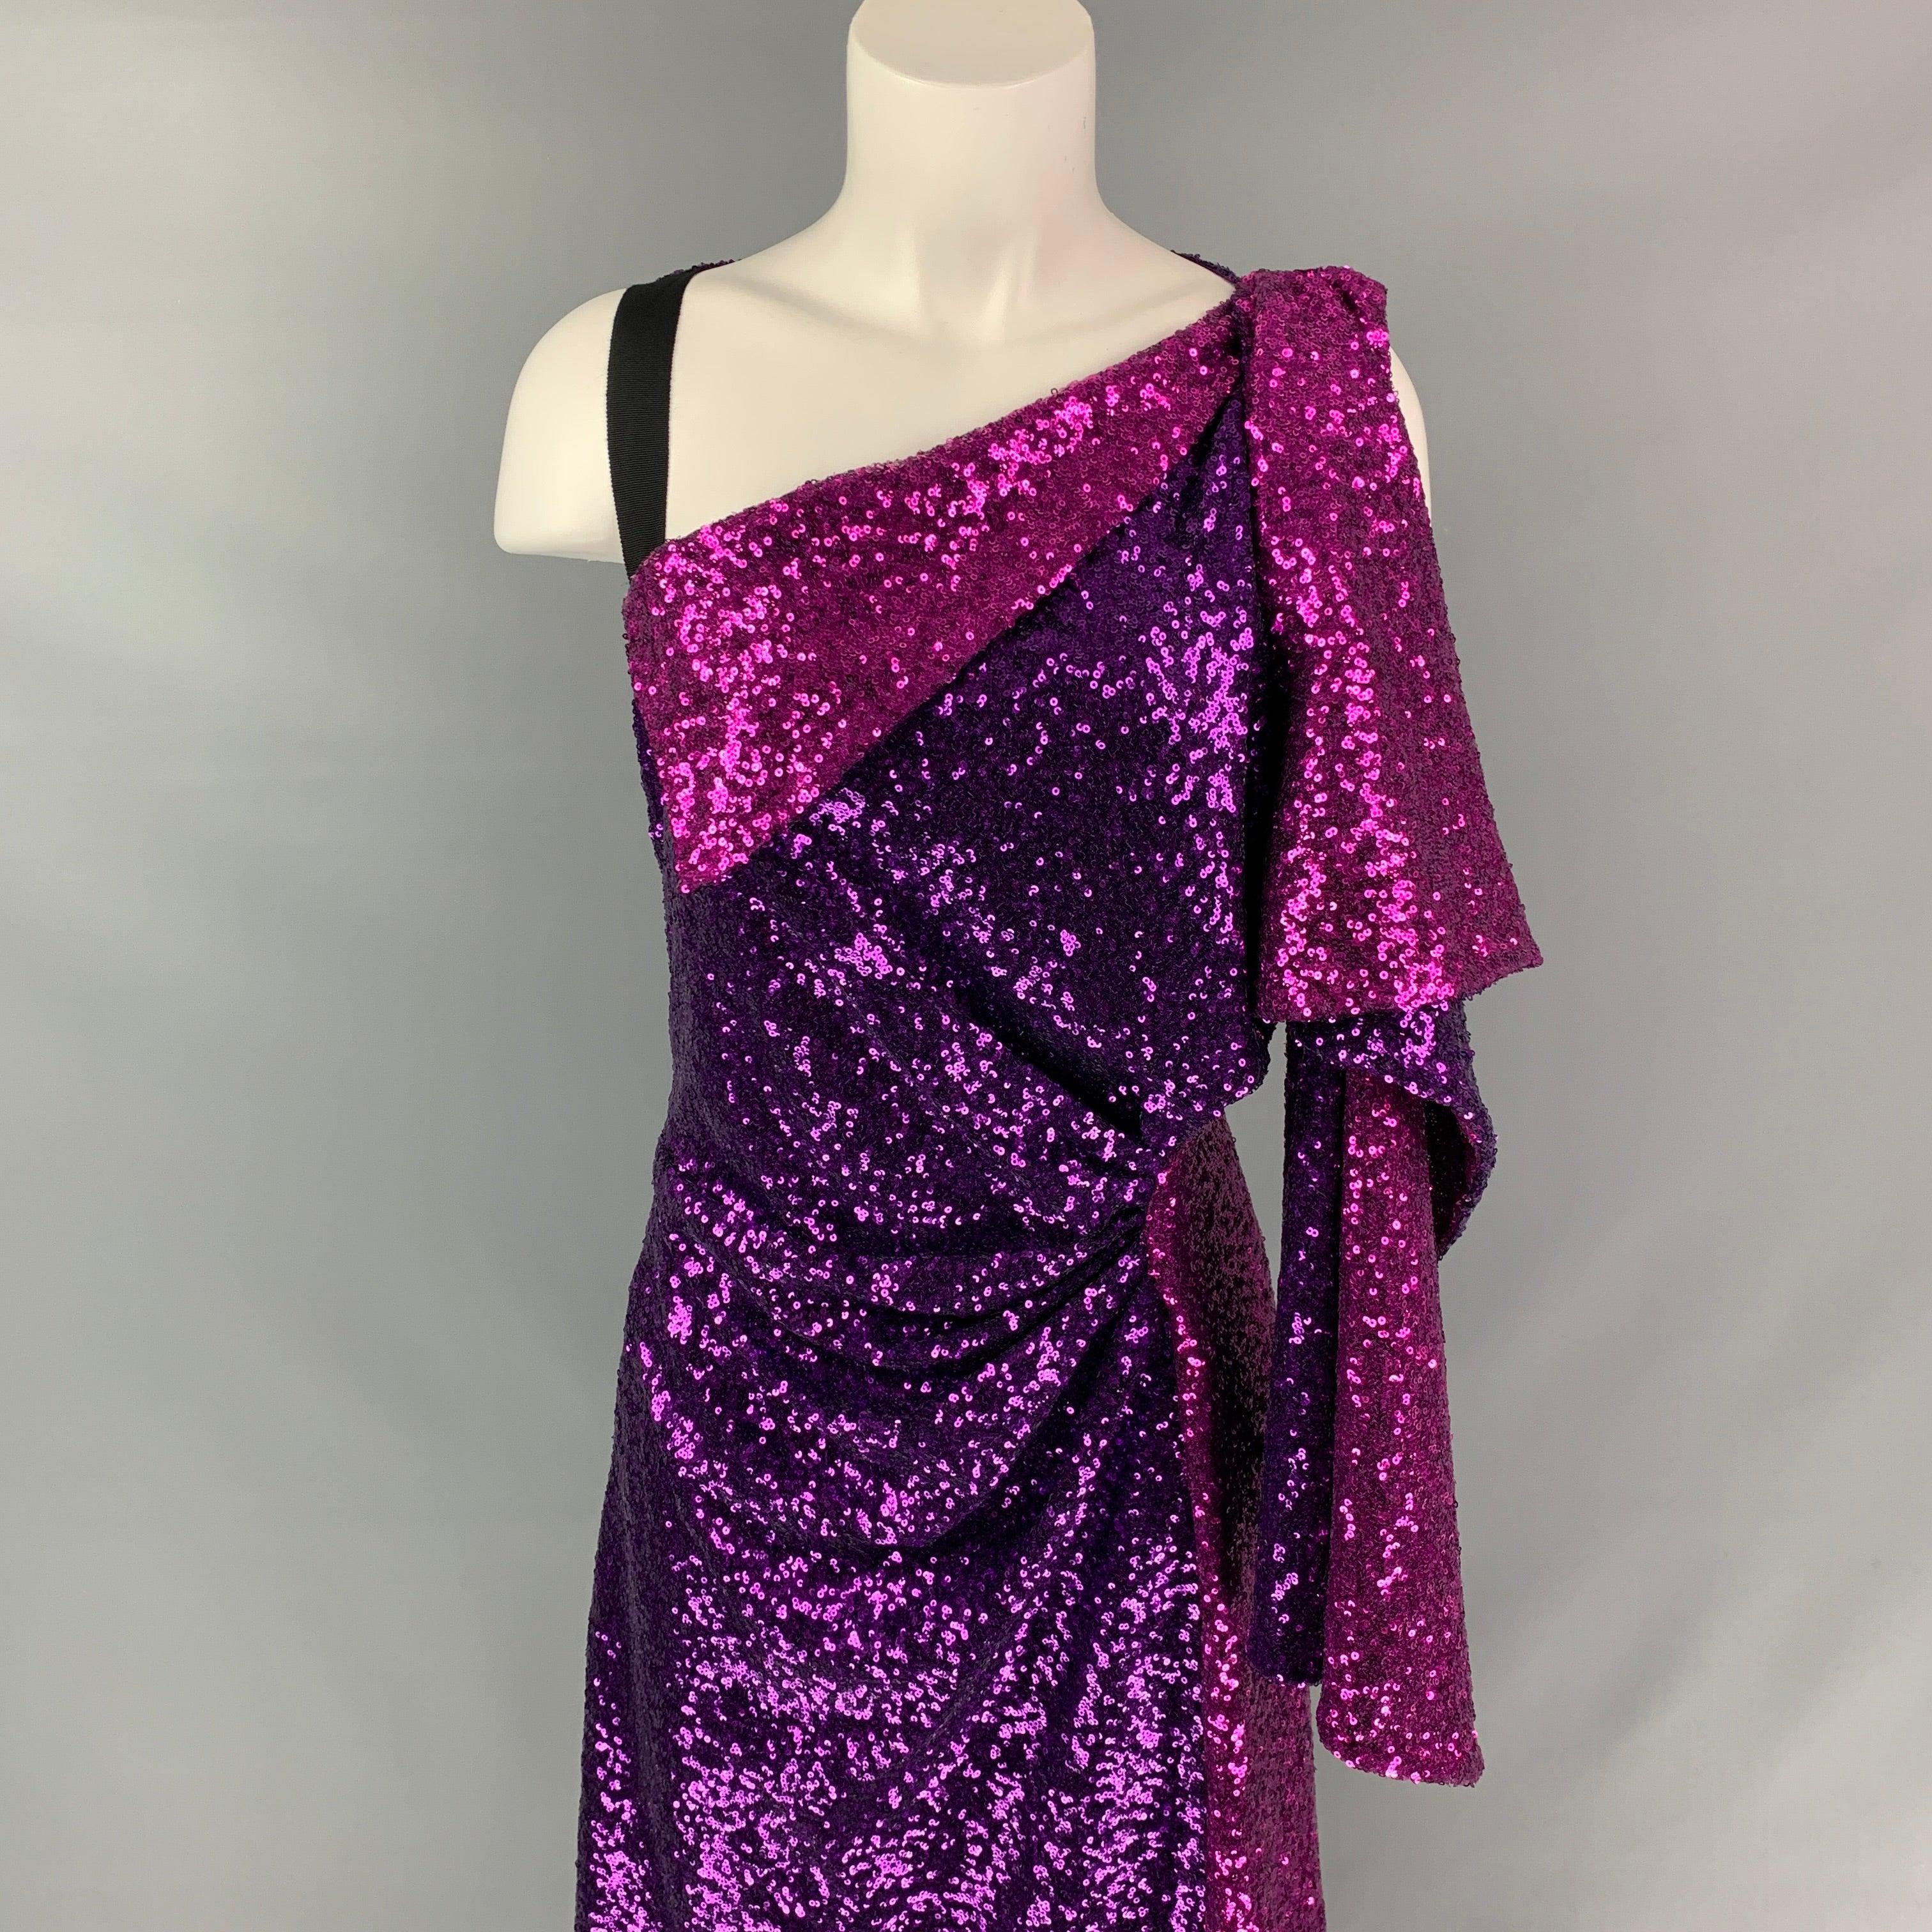 PRABAL GURUNG dress comes in a purple & fuchsia sequined polyester featuring a one shoulder style, draped design, front slit, elastic strap, and a side zipper closure. Made in USA.
Excellent Pre-Owned Condition. 

Marked:   6 

Measurements: 
 